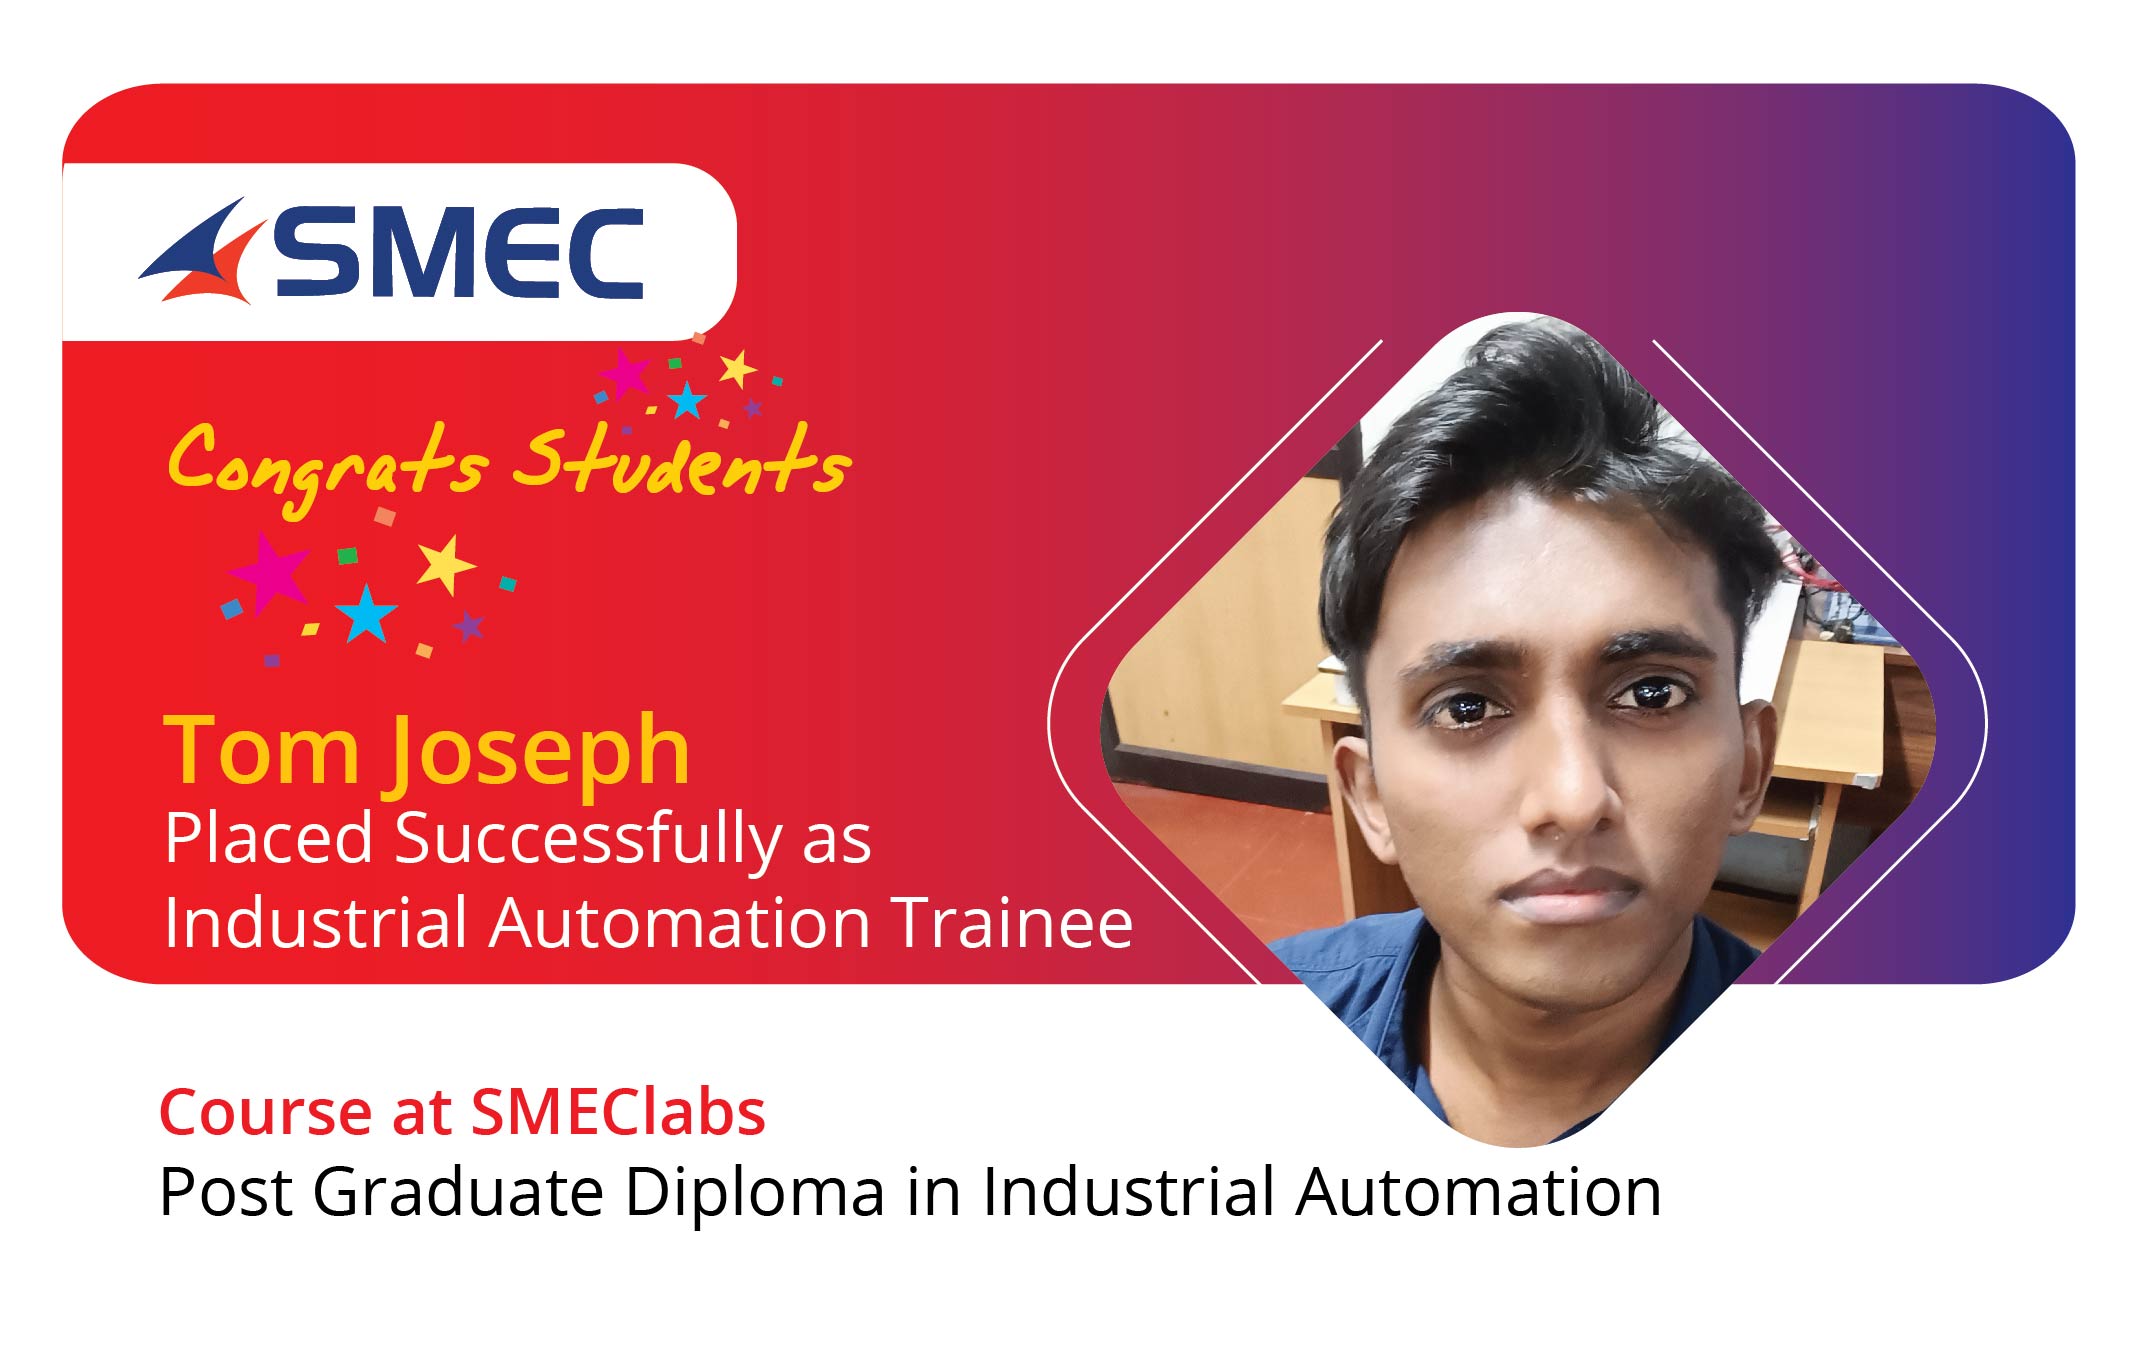 placed successfully as Industrial Automation Trainee